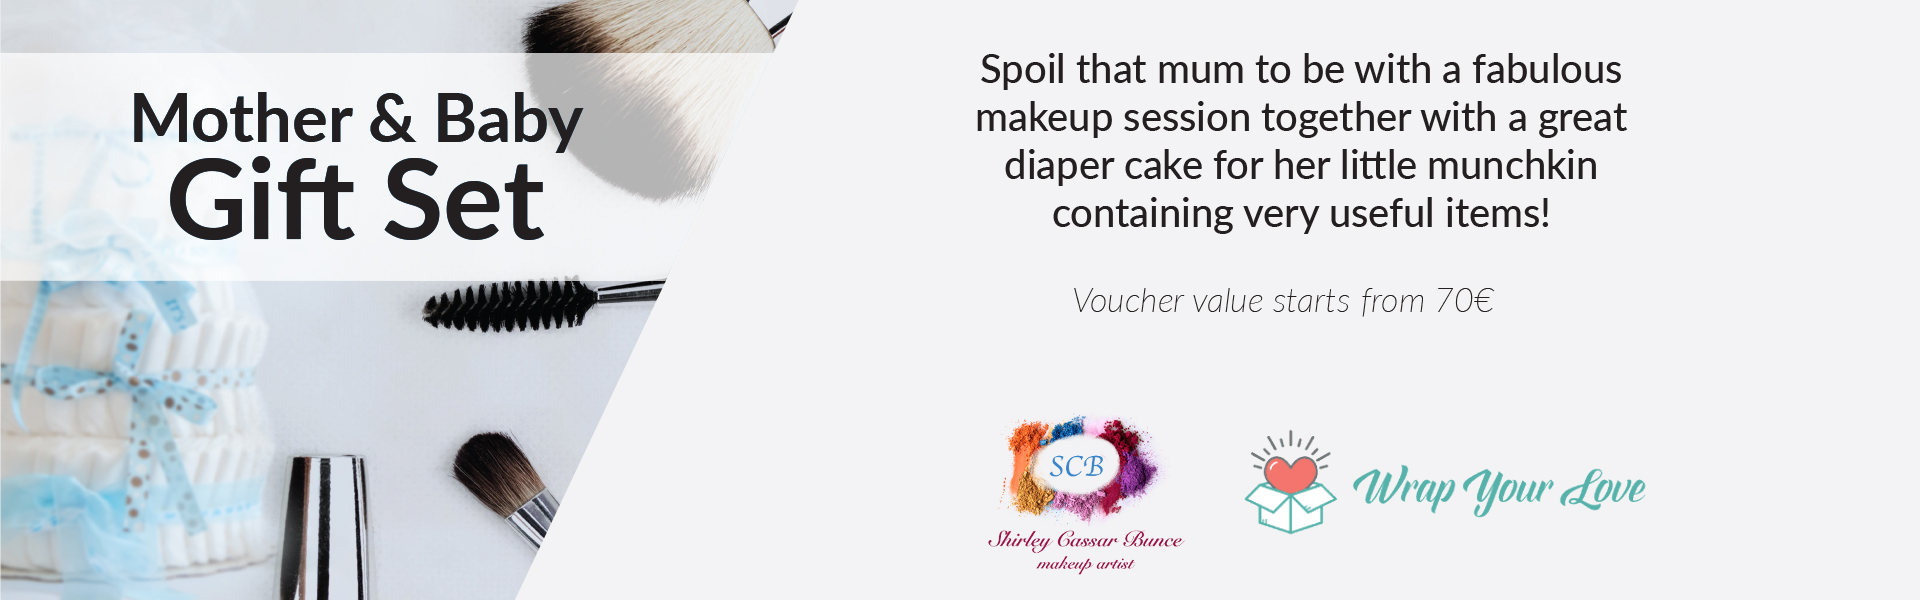 Mum and Baby Gift Set by Wrap Your Love 1920x600